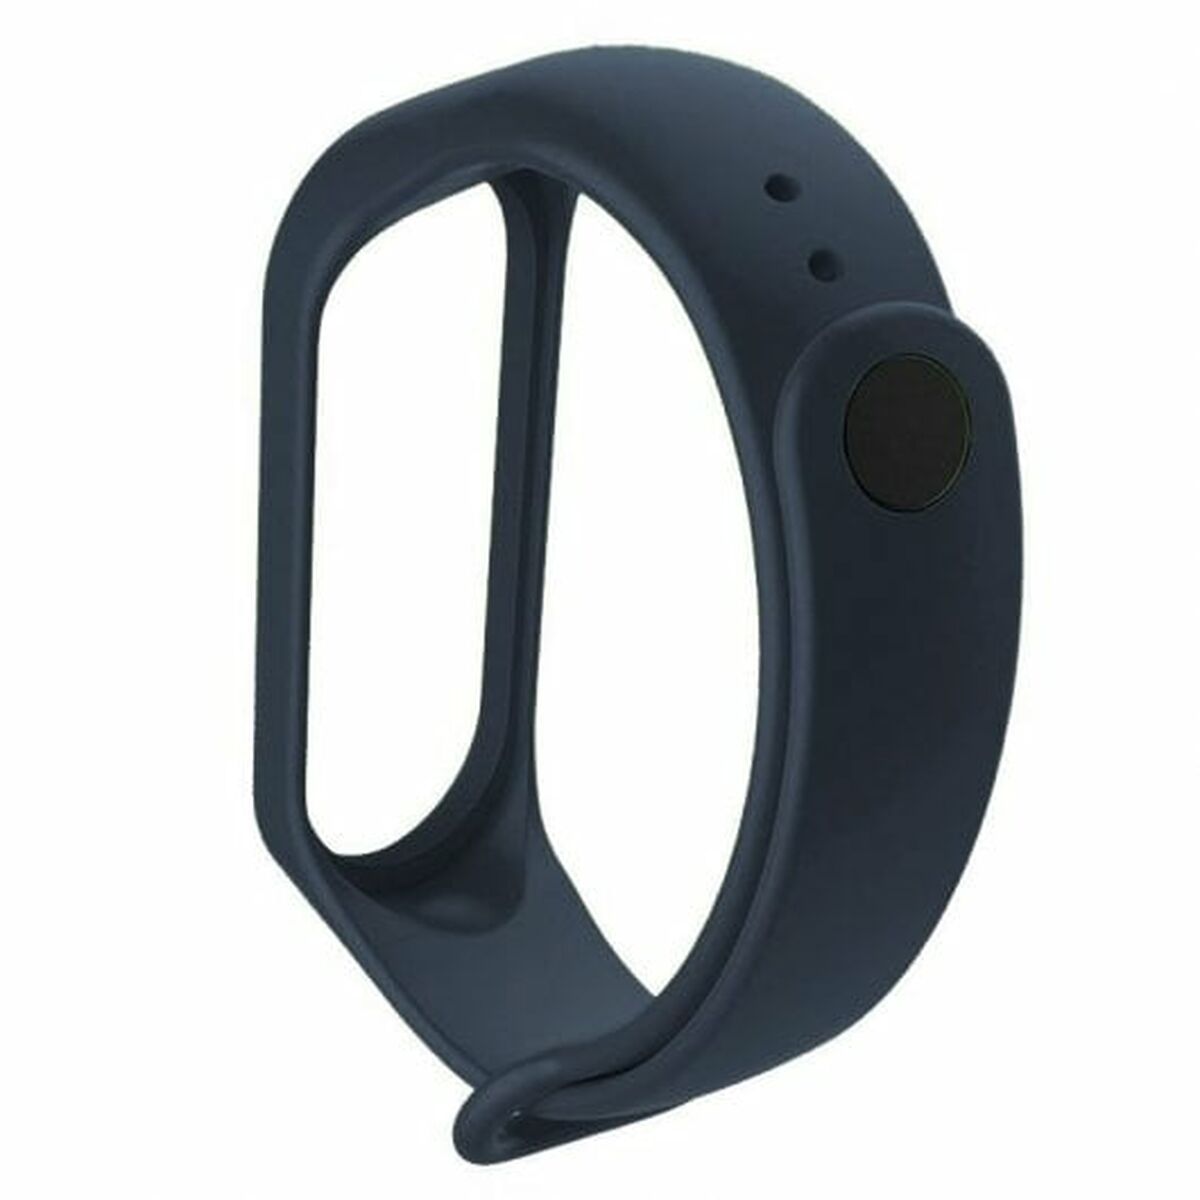 Replacement Activity Bracelet Cool Xiaomi mi Band 5 / mi Band 6, Cool, Electronics, Mobile communication and accessories, replacement-activity-bracelet-cool-xiaomi-mi-band-5-mi-band-6, Brand_Cool, category-reference-2609, category-reference-2617, category-reference-2634, category-reference-t-19653, category-reference-t-4036, category-reference-t-4037, category-reference-t-4041, Condition_NEW, original gifts, Price_20 - 50, telephones & tablets, RiotNook